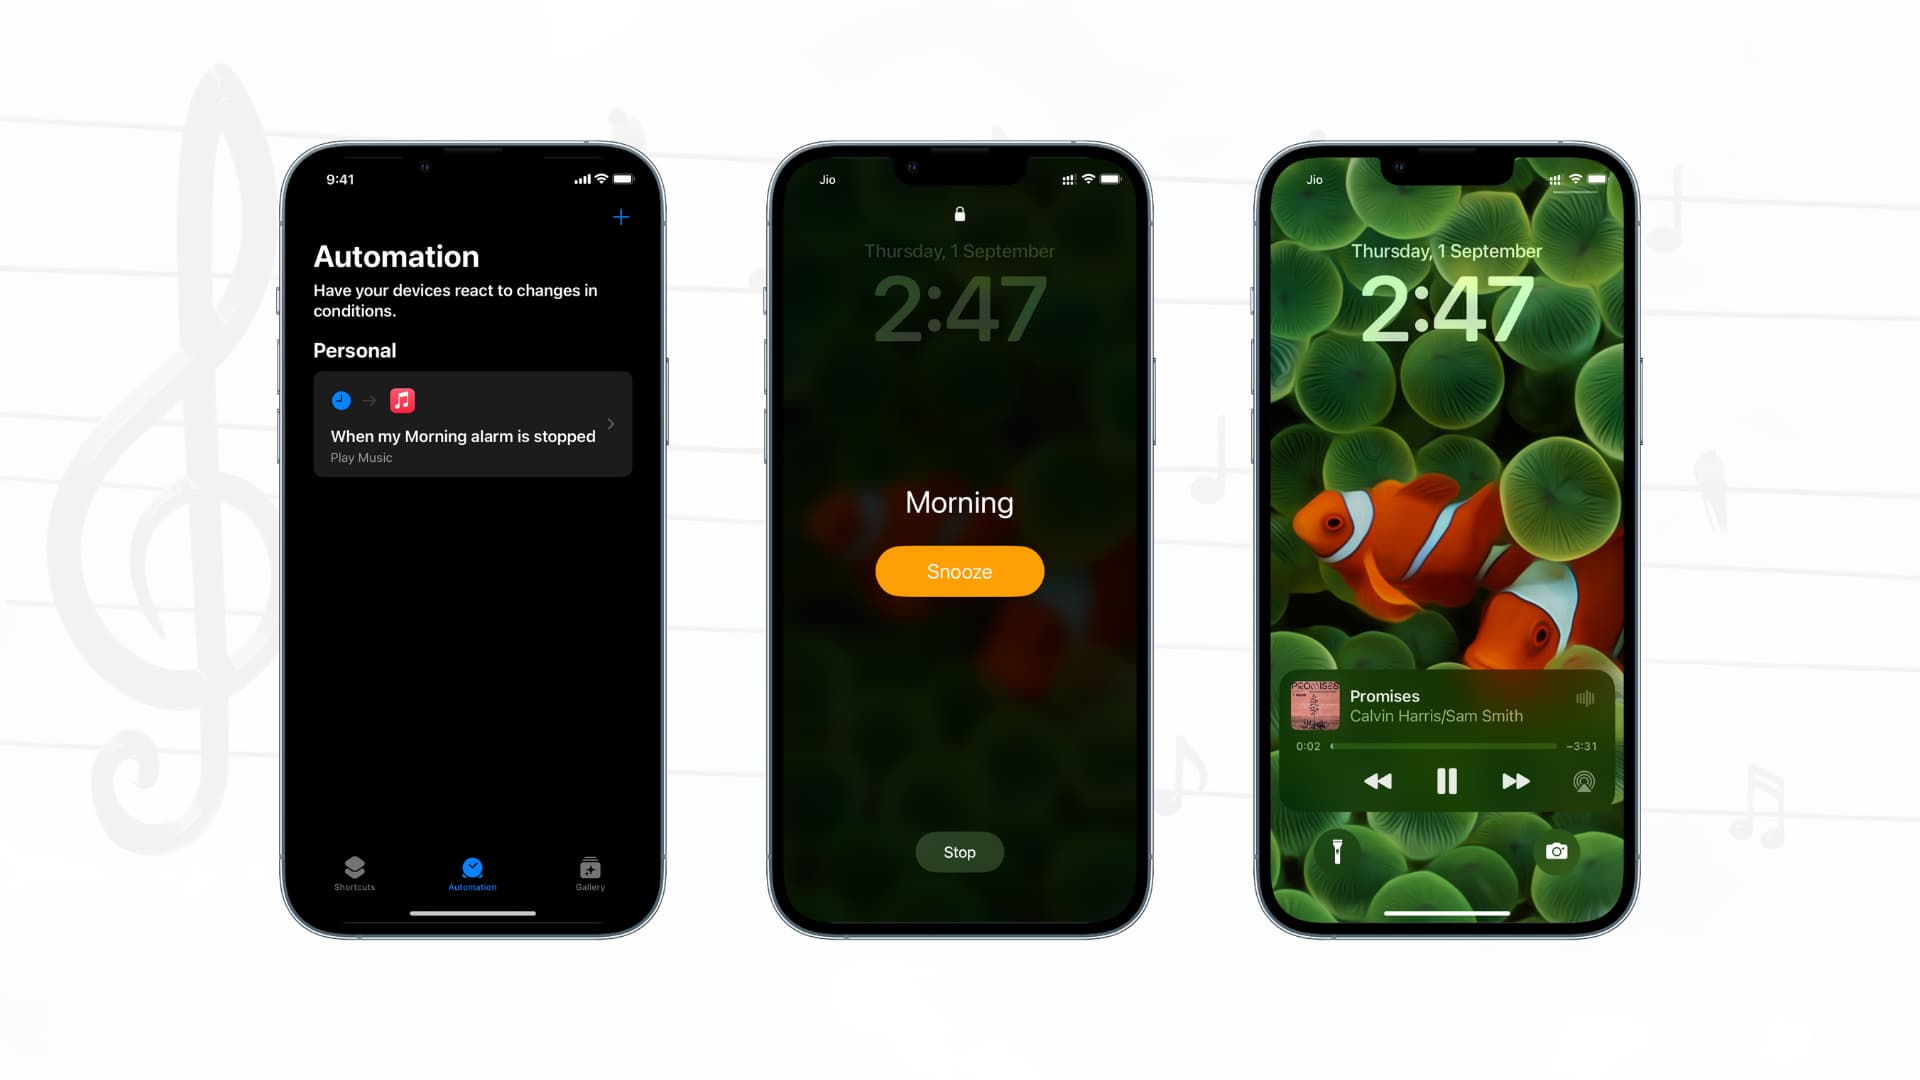 Automatically play music when alarm stops on iPhone